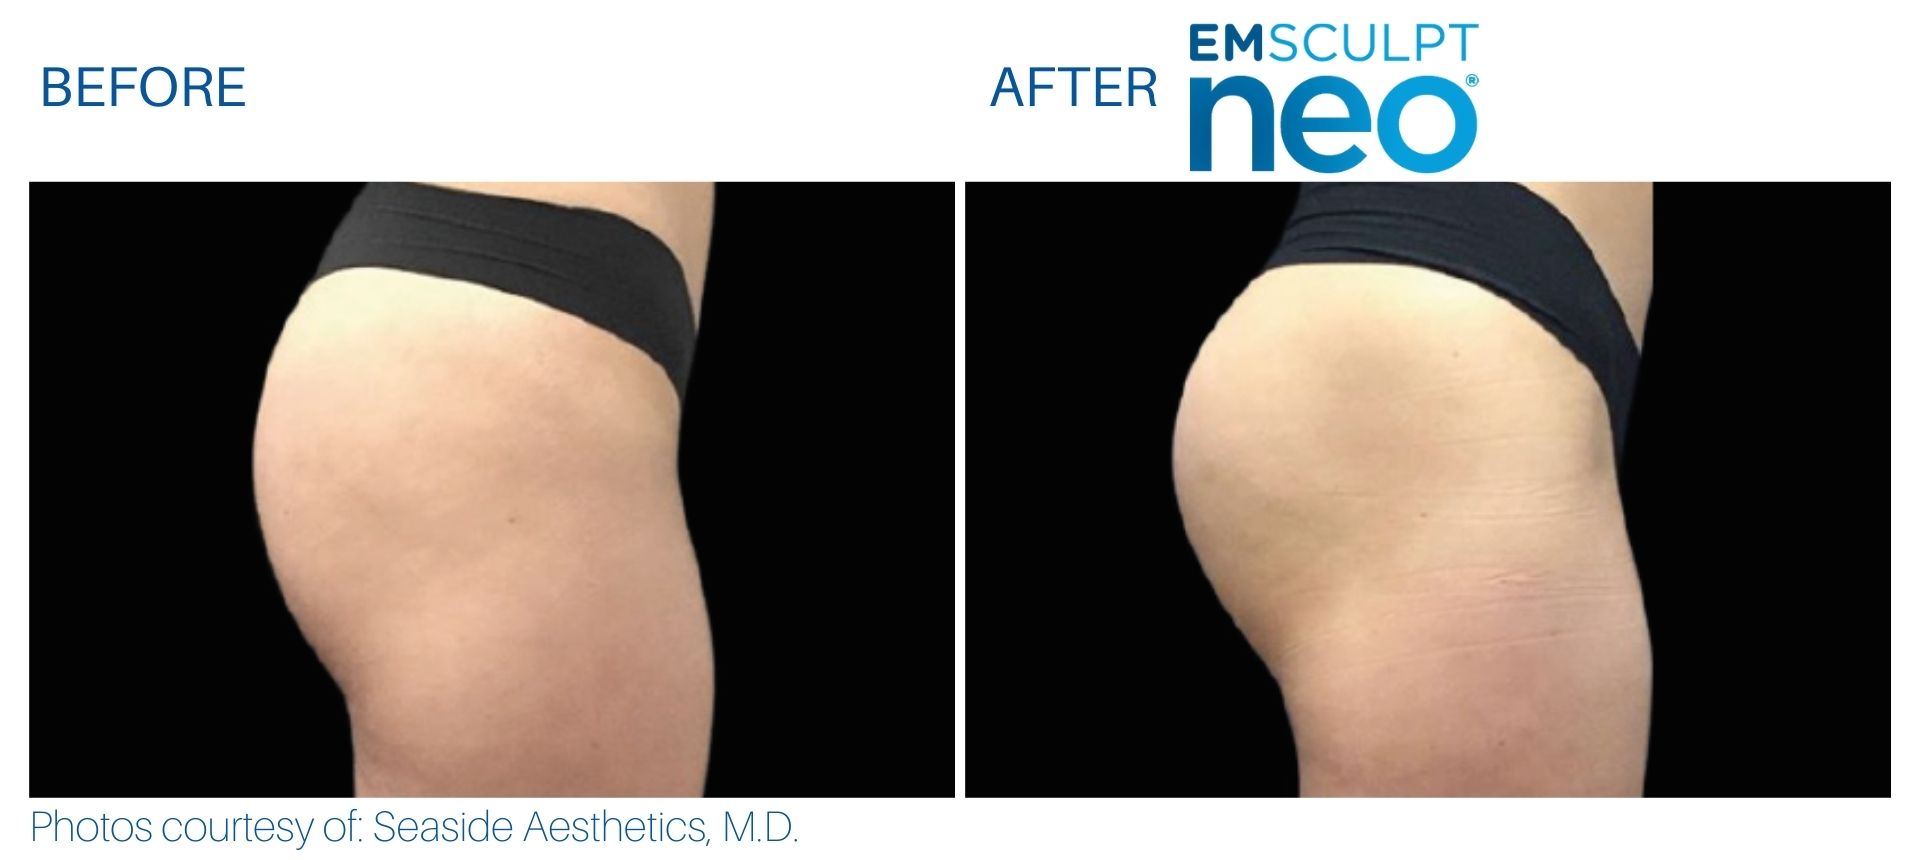 Buttocks Before And After Results After Emsculpt Neo Treatment At Optimum In Albuquerque, Nm.